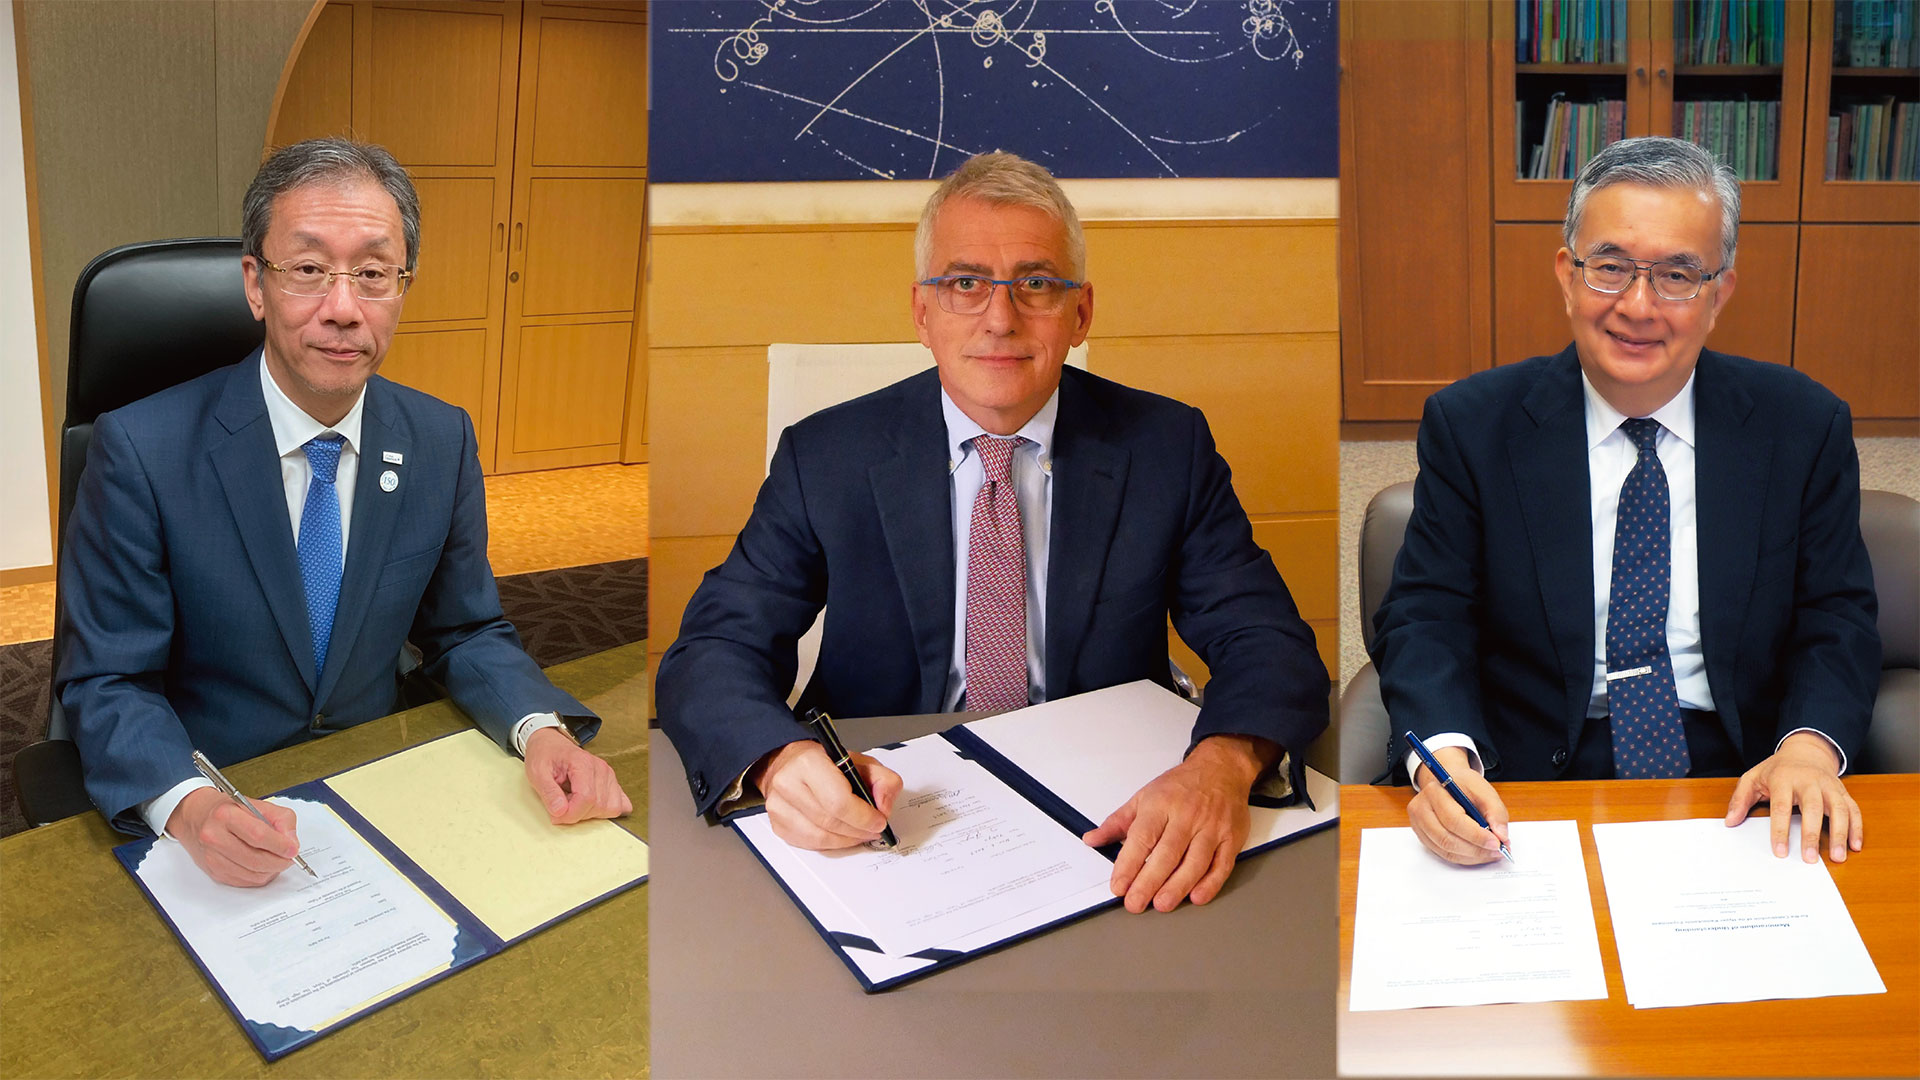 Italy and Japan work together on neutrino physics: INFN, KEK and UTokyo sign a MoU for the Hyper-Kamiokande project